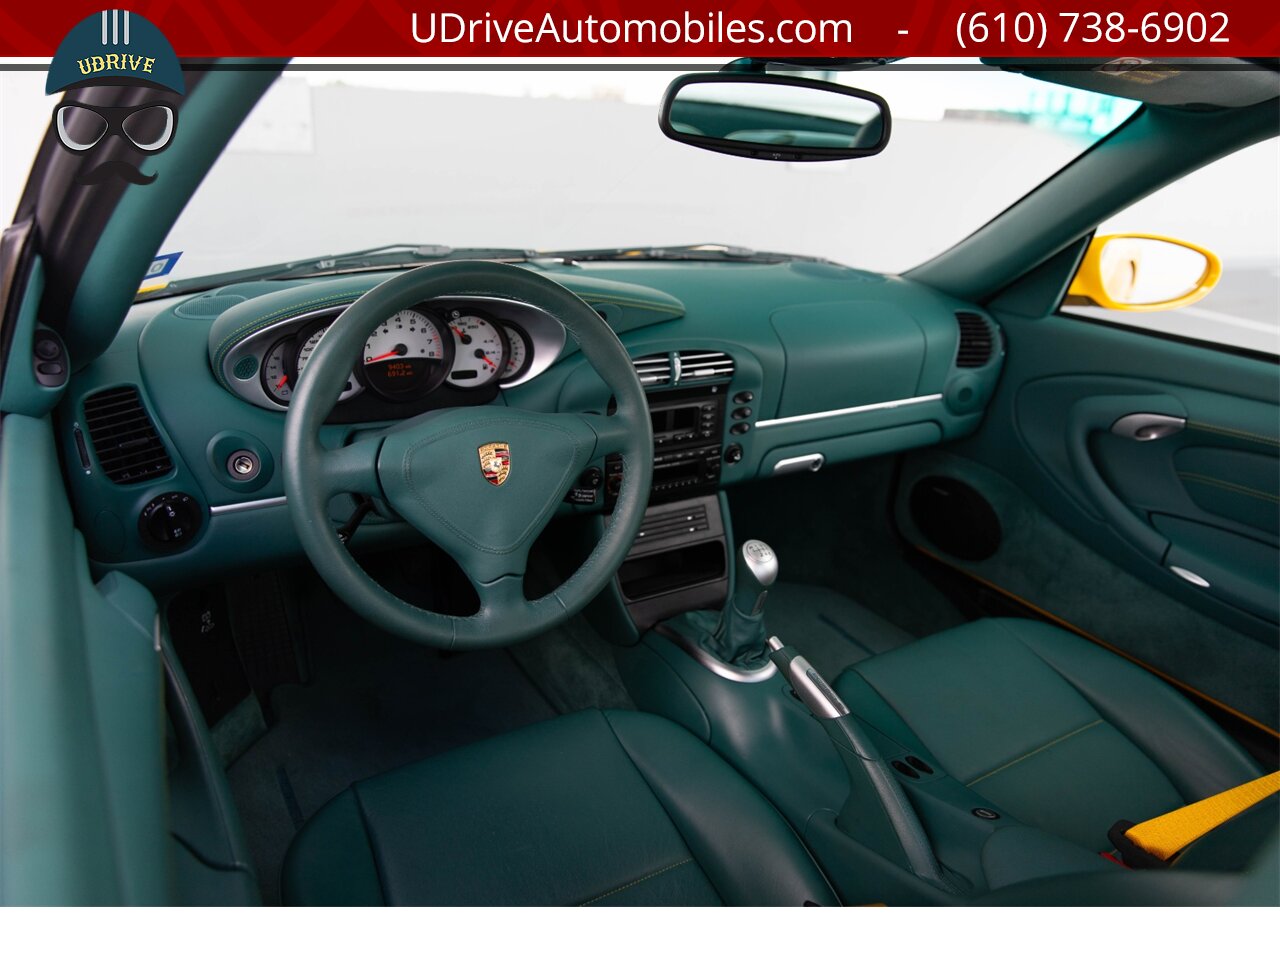 2003 Porsche 911 996 Turbo X50 6Sp Nephrite Green Lthr 9k Miles  Deviating Yellow Stitching Collector Grade BACK AGAIN - Photo 28 - West Chester, PA 19382